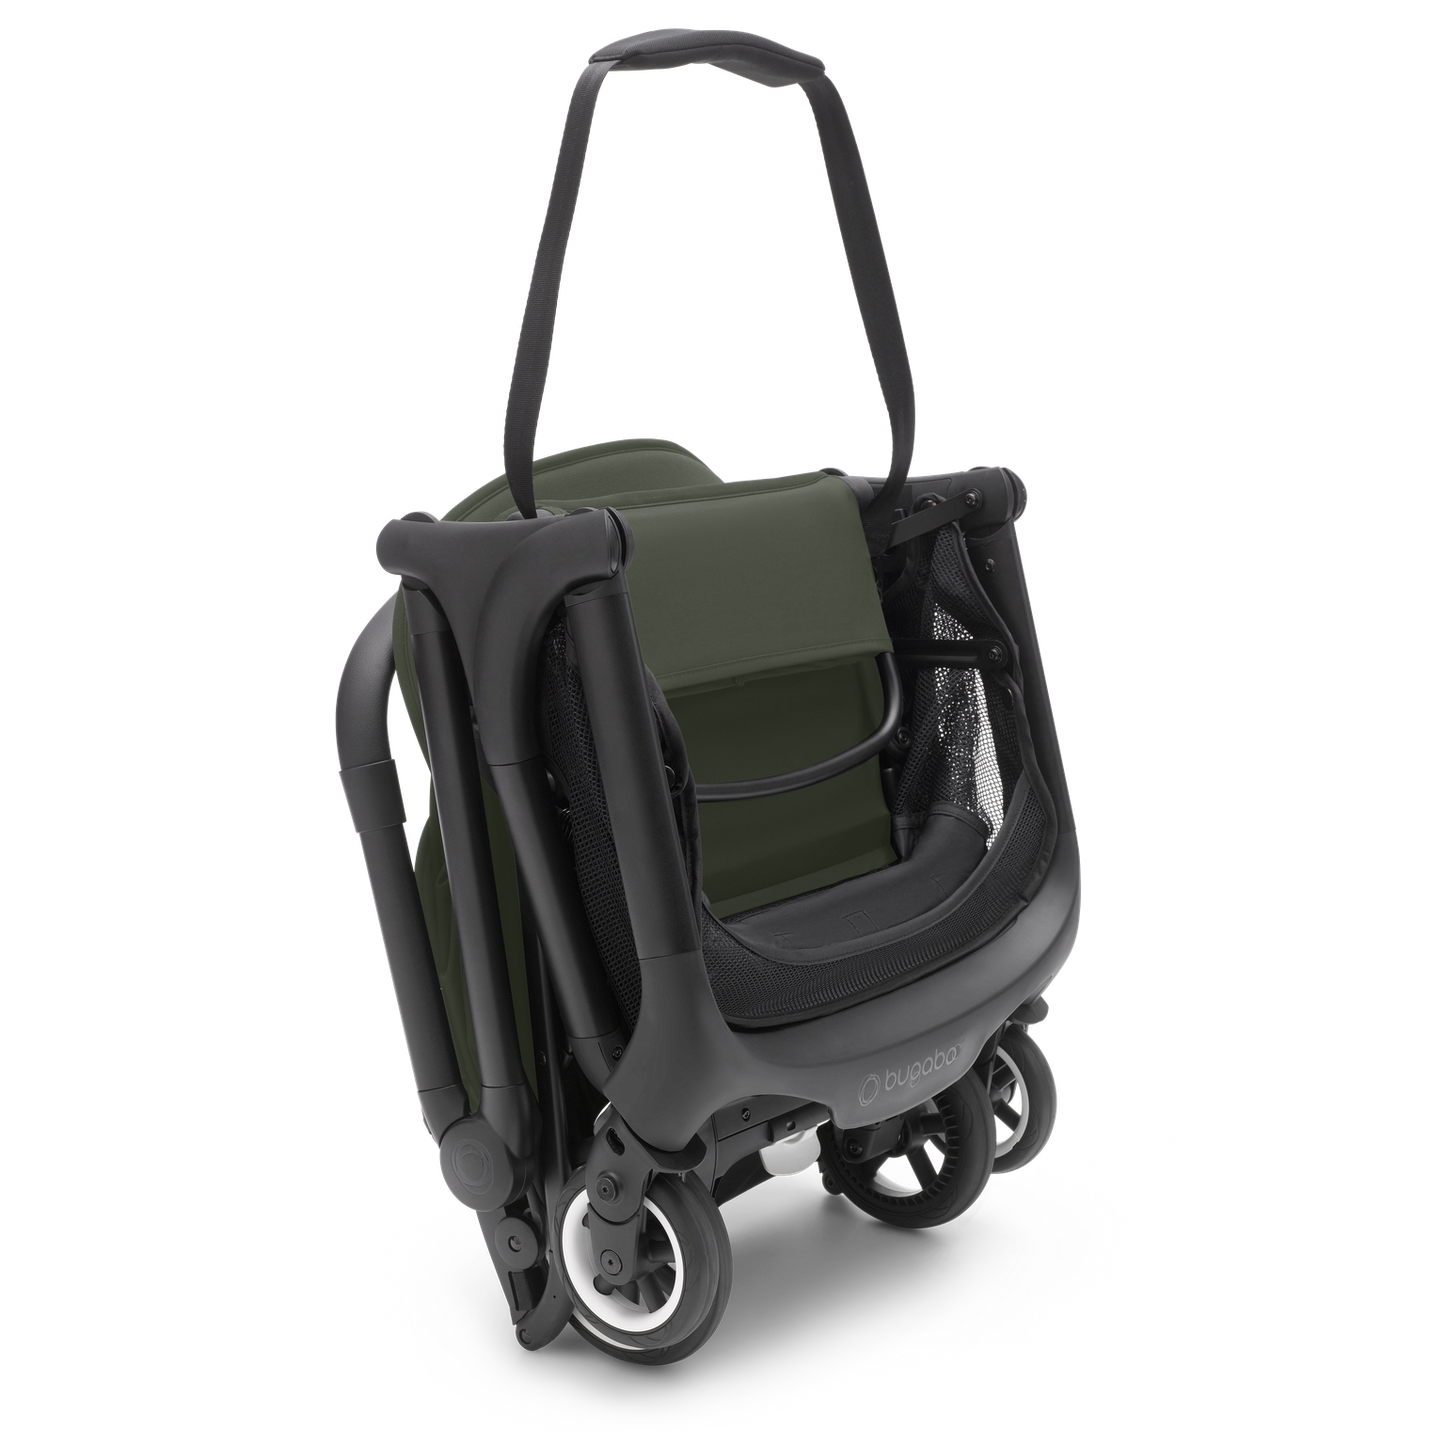 Bugaboo Butterfly Compact Stroller | Forest Green | Travel Lightweight Buggy | Strap